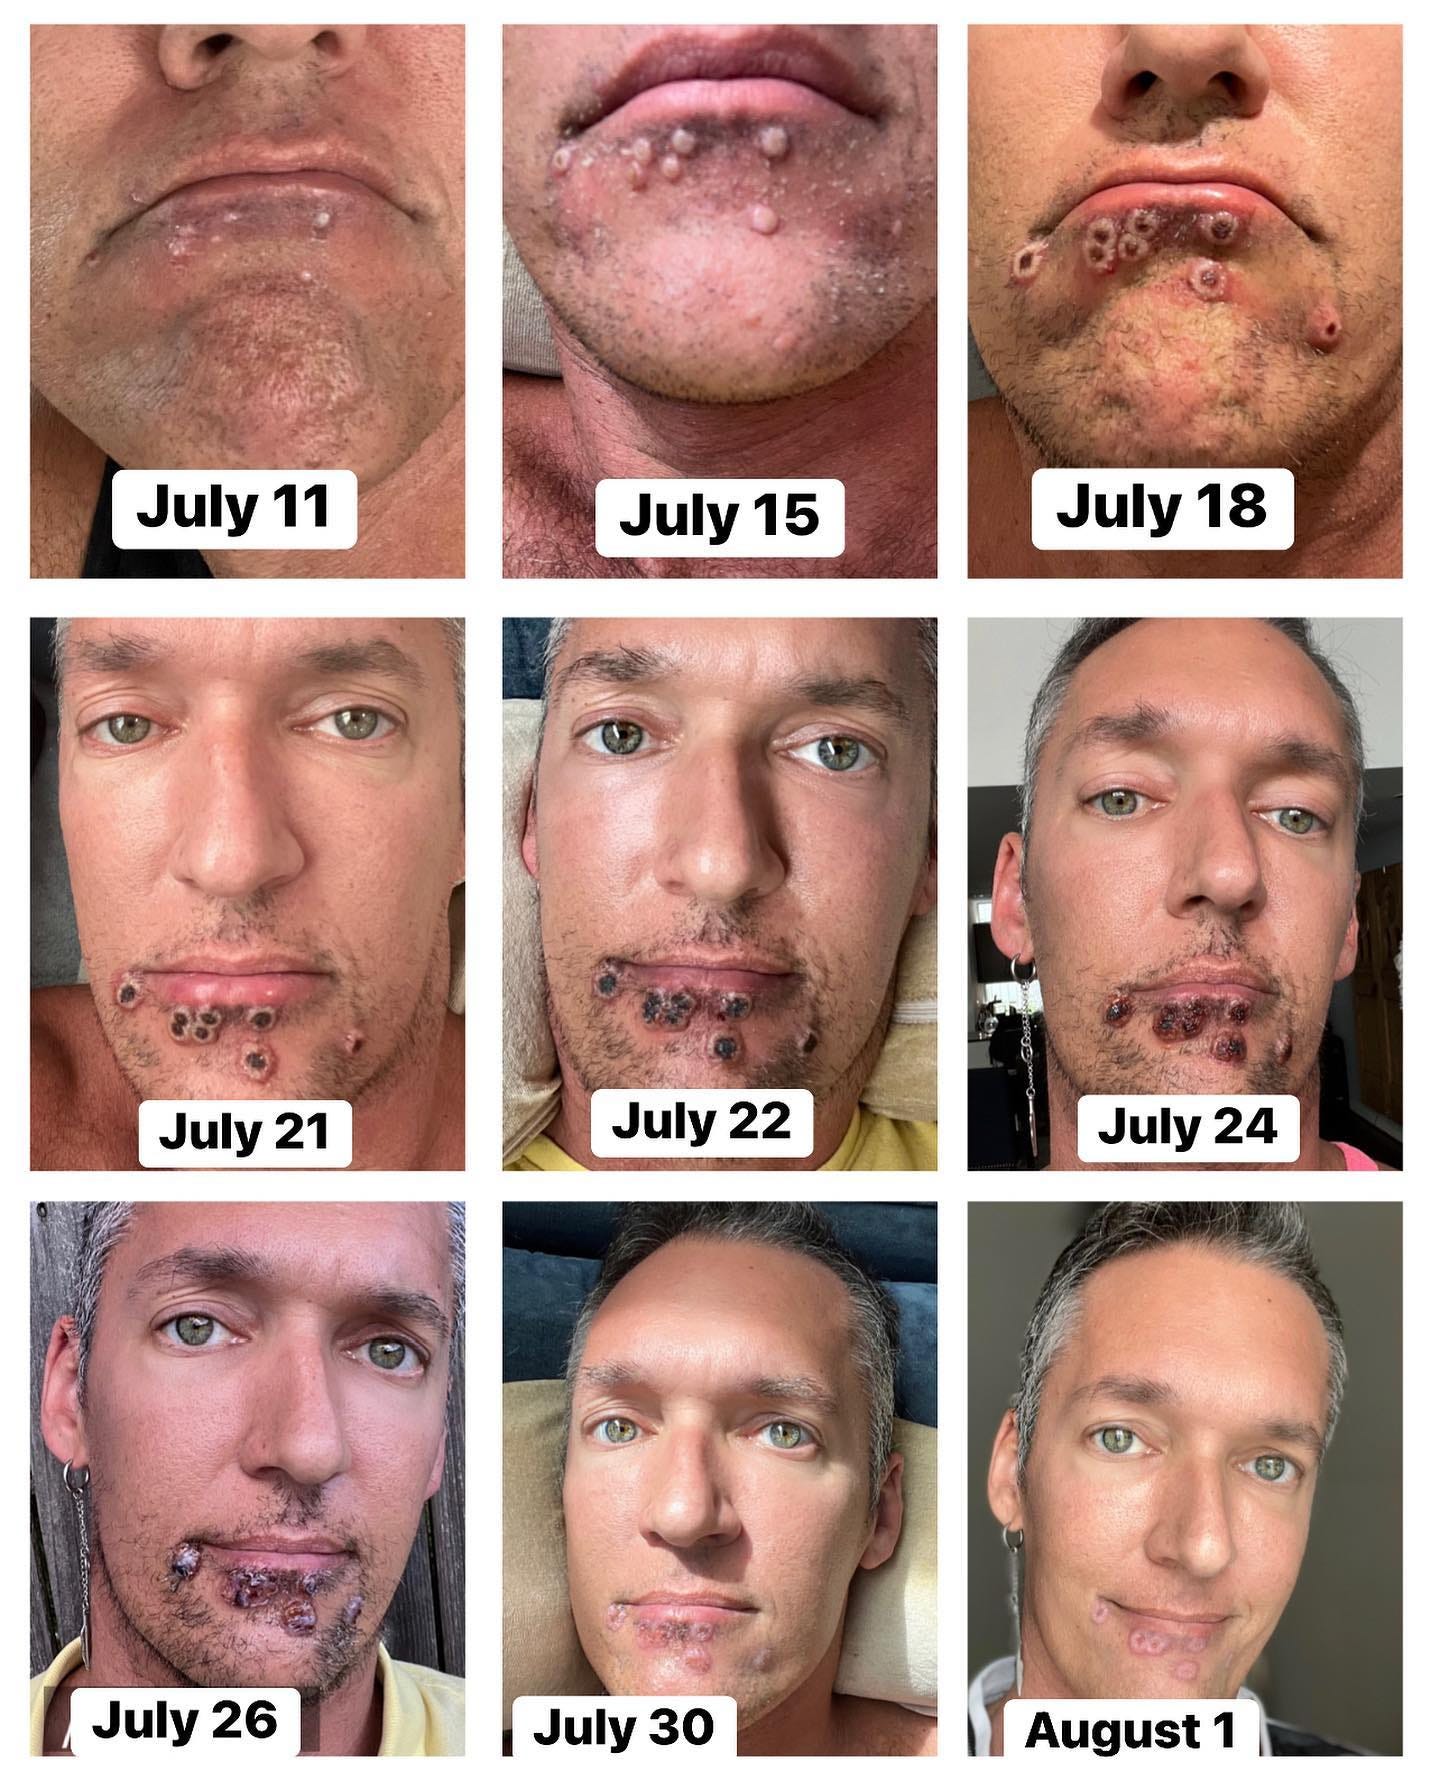 Silver Steele shared these images of how the monkeypox rash developed on his face over around 20 days